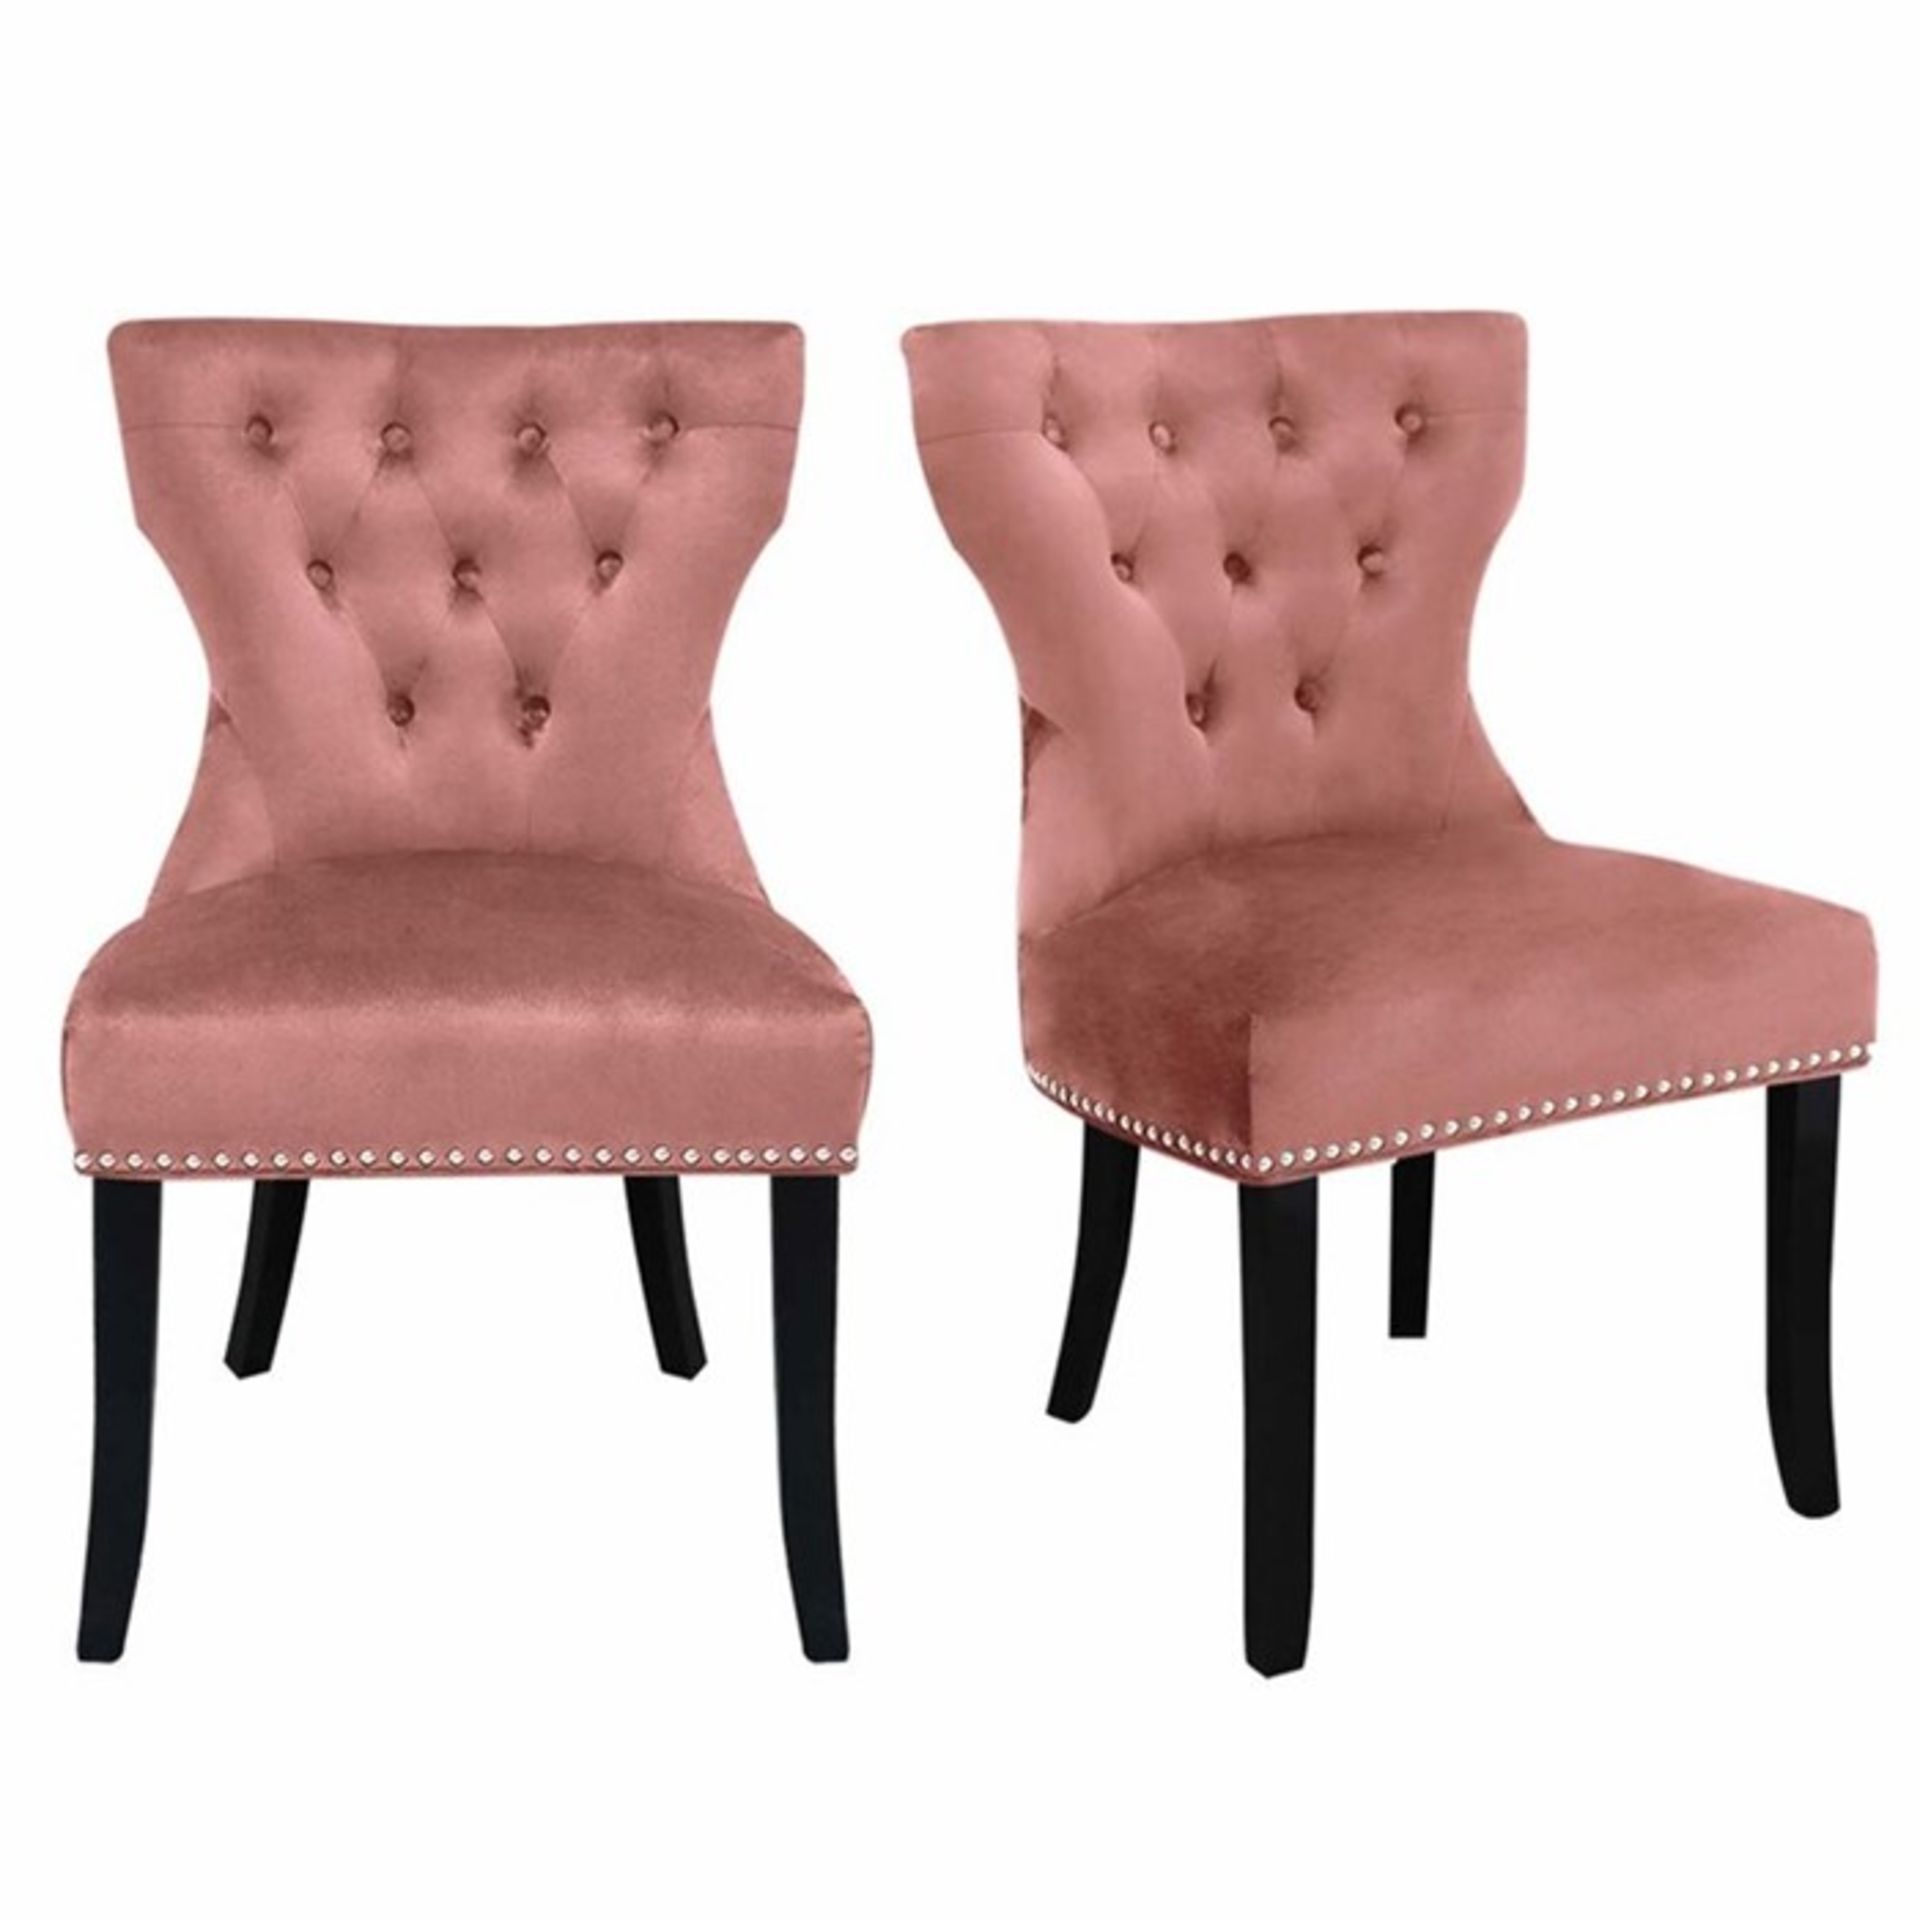 SET OF 2 SINGLETARY UPHOLSTERED DINING CHAIRS BY MERCER41